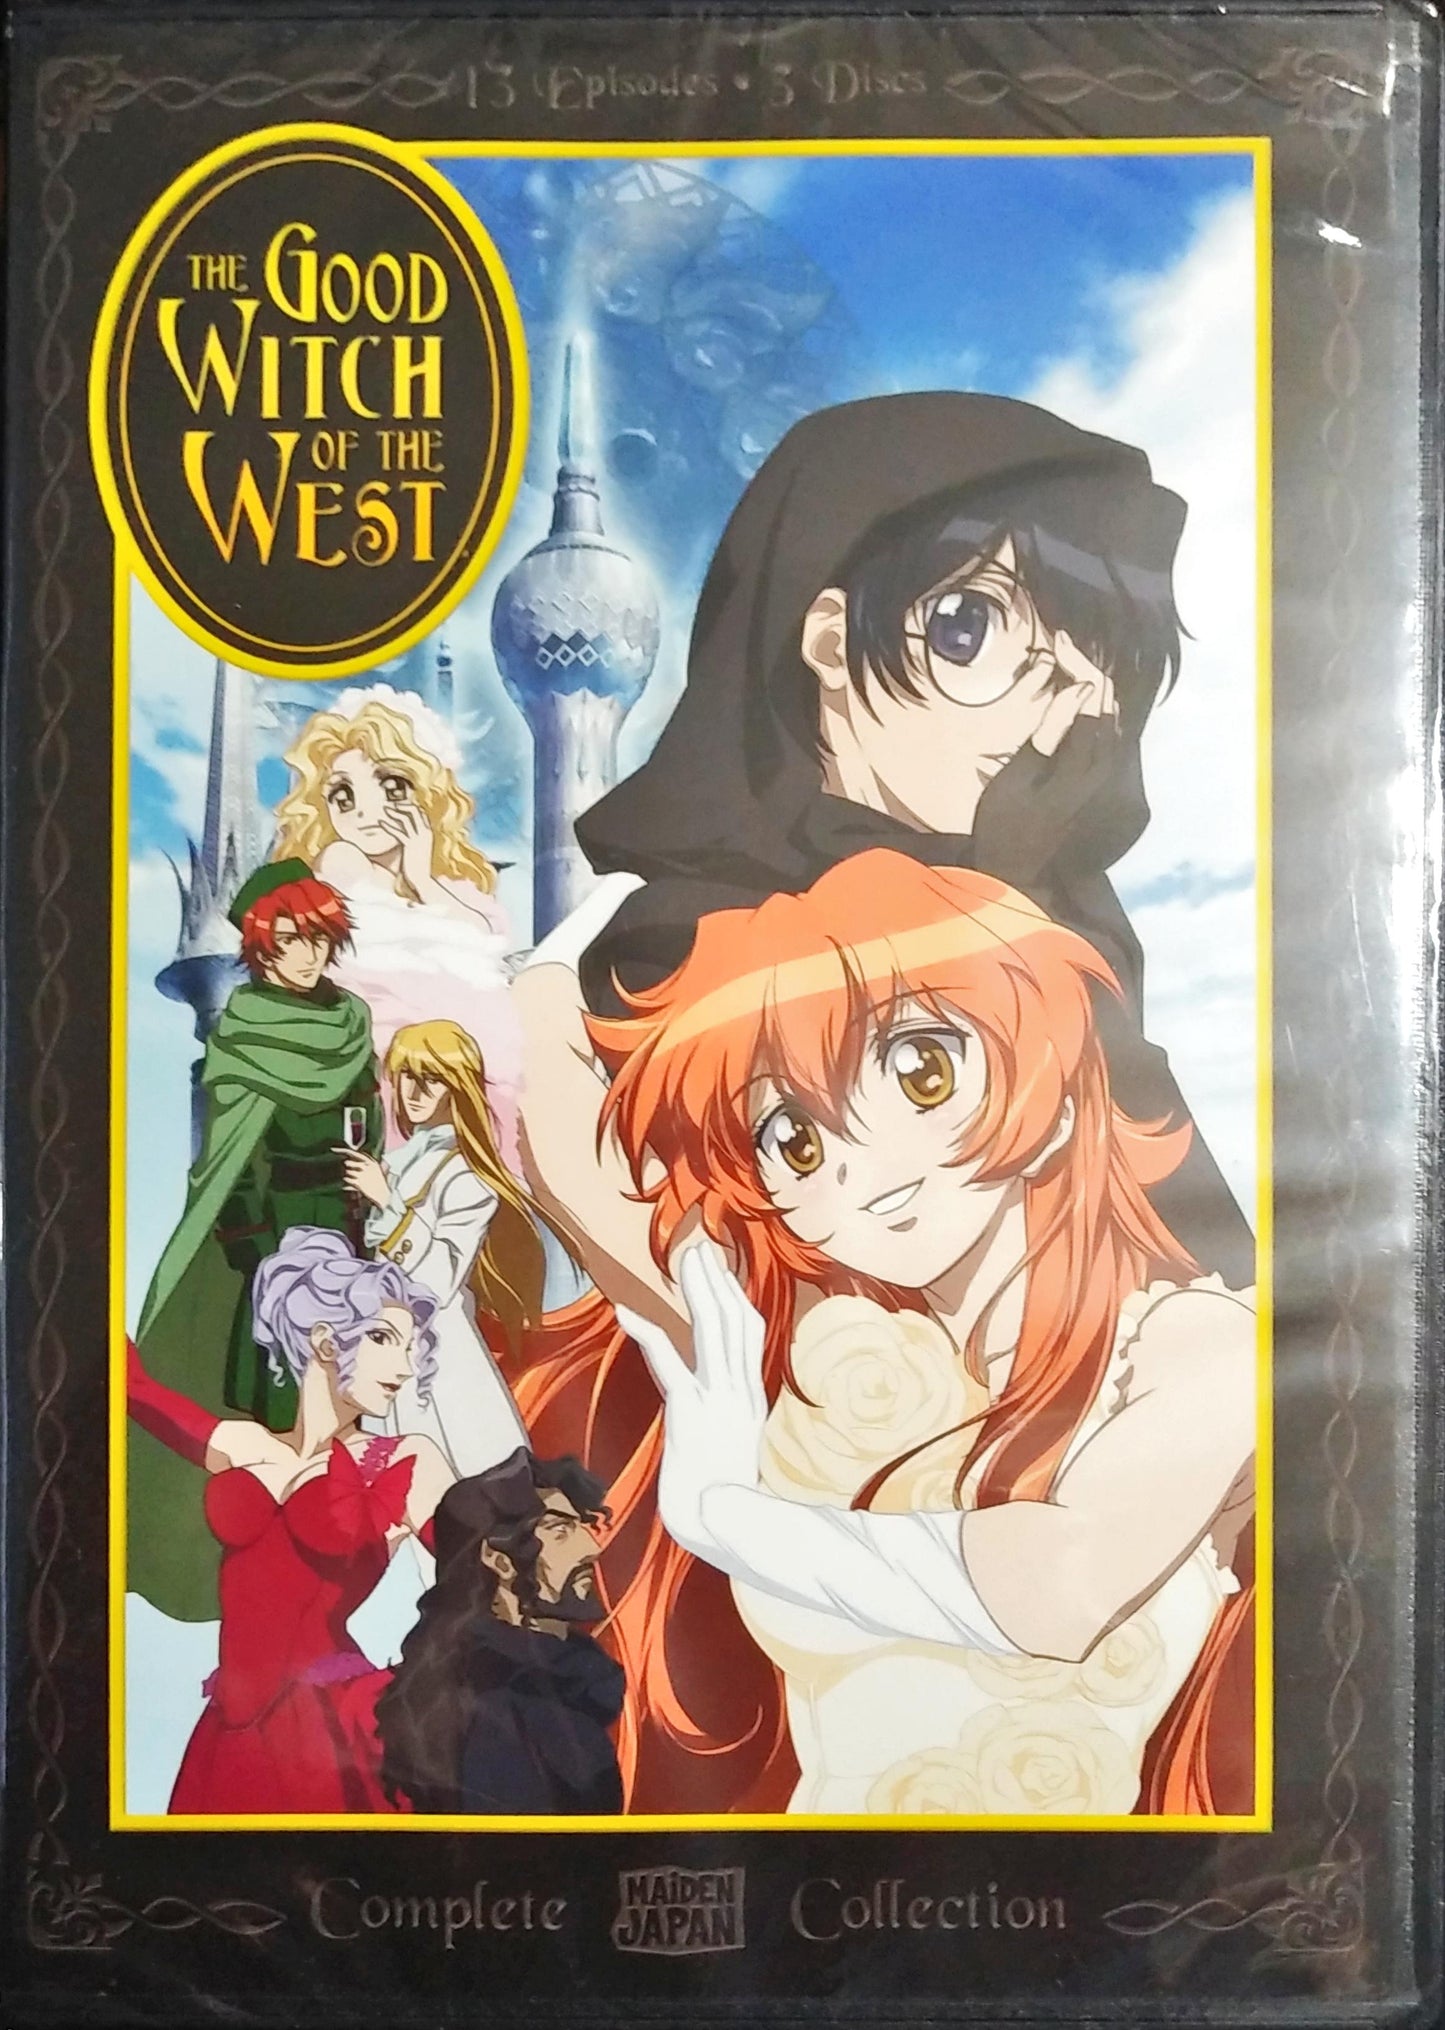 The Good Witch Of The West DVD Complete Collection Sealed